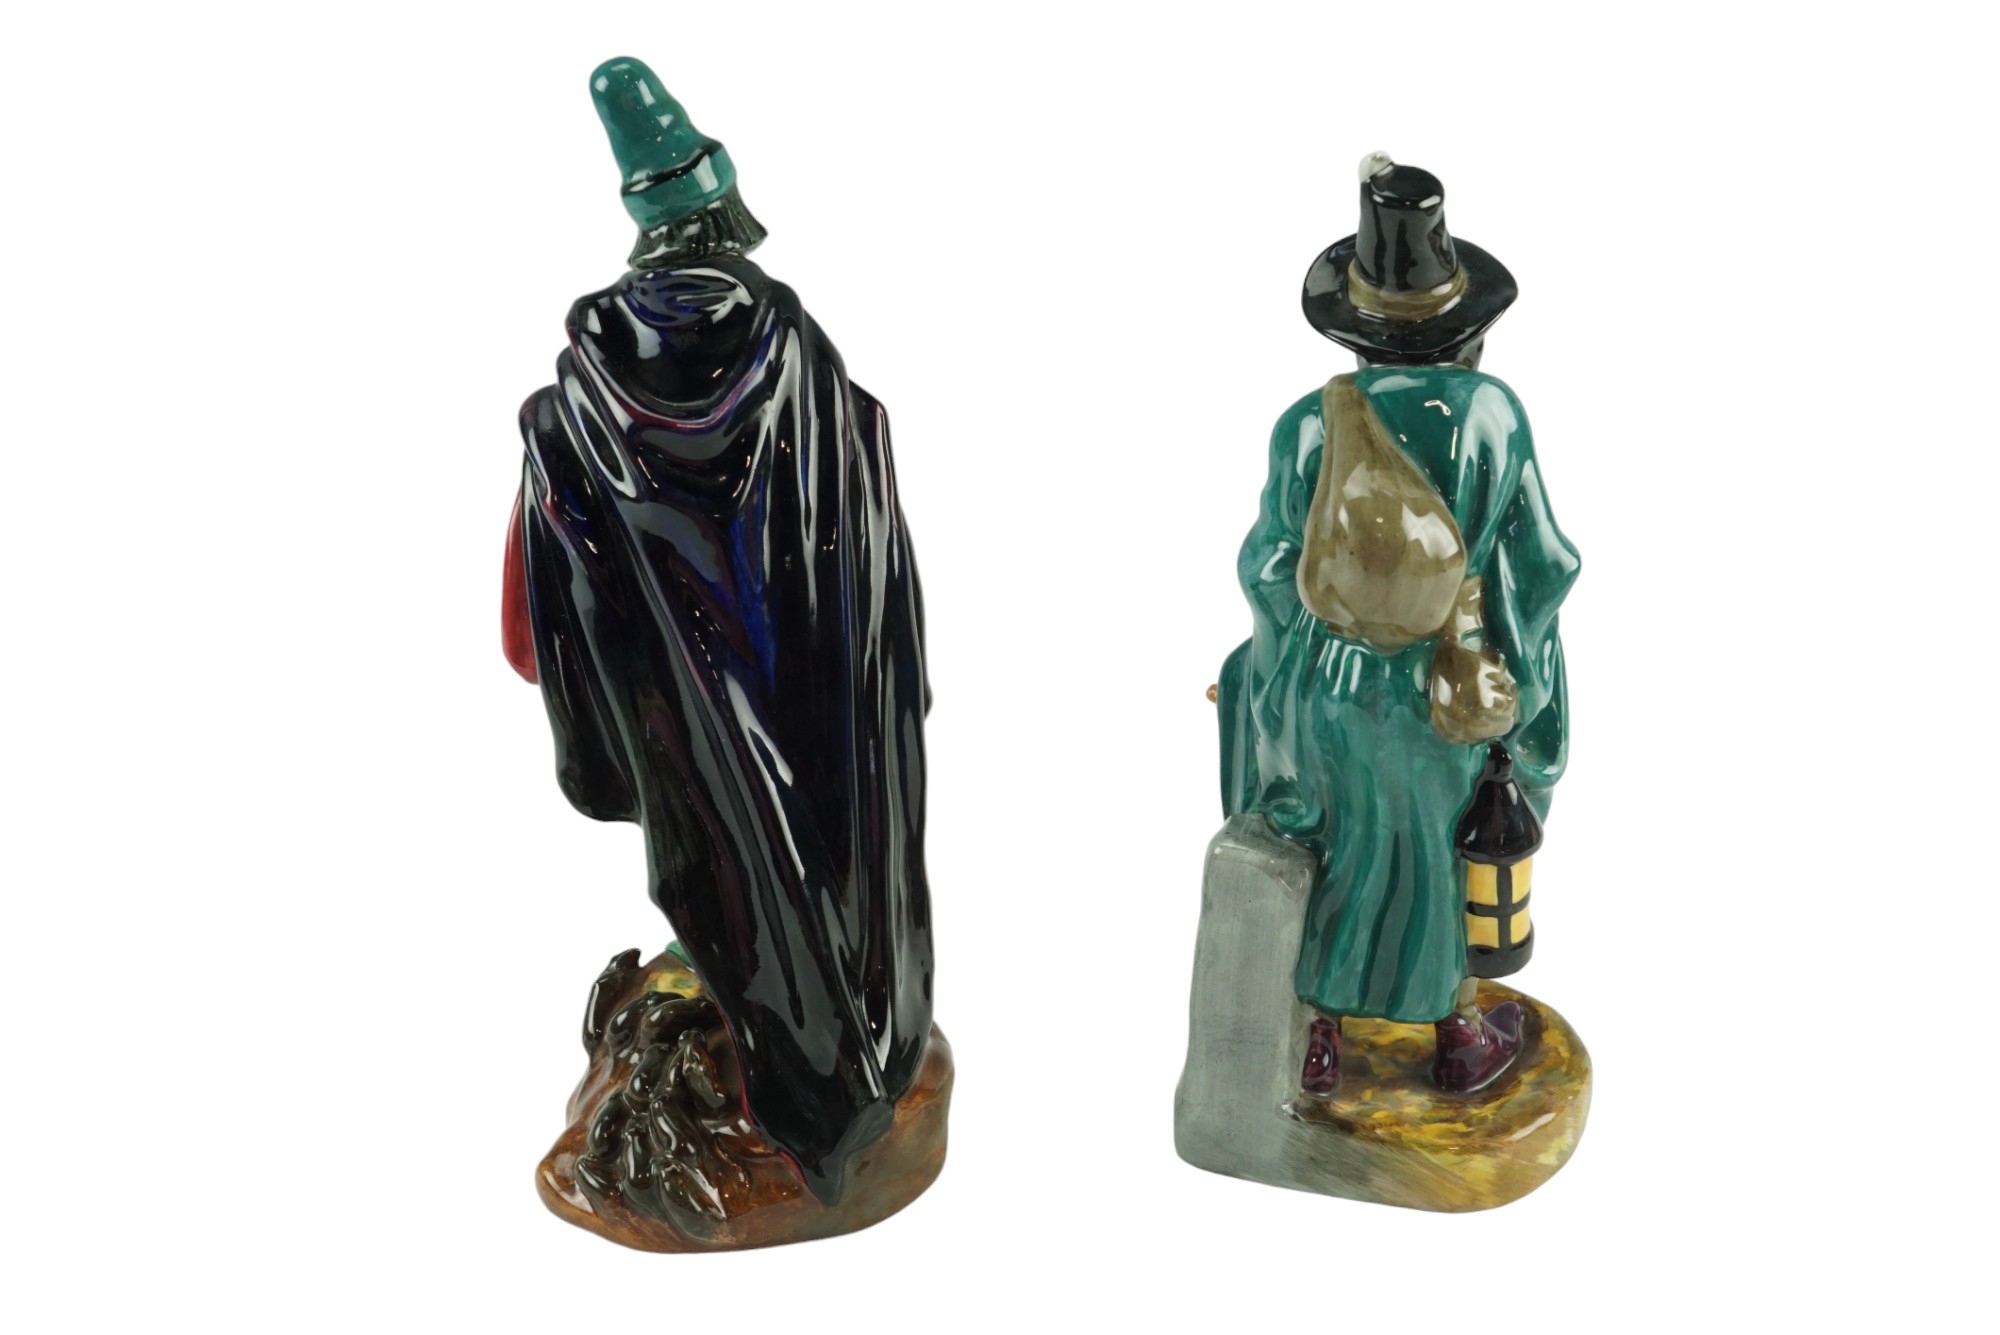 Two Royal Doulton figurines; "The Mask Seller" and "The Pied Piper", HN 2103 and HN 2102 - Image 2 of 2